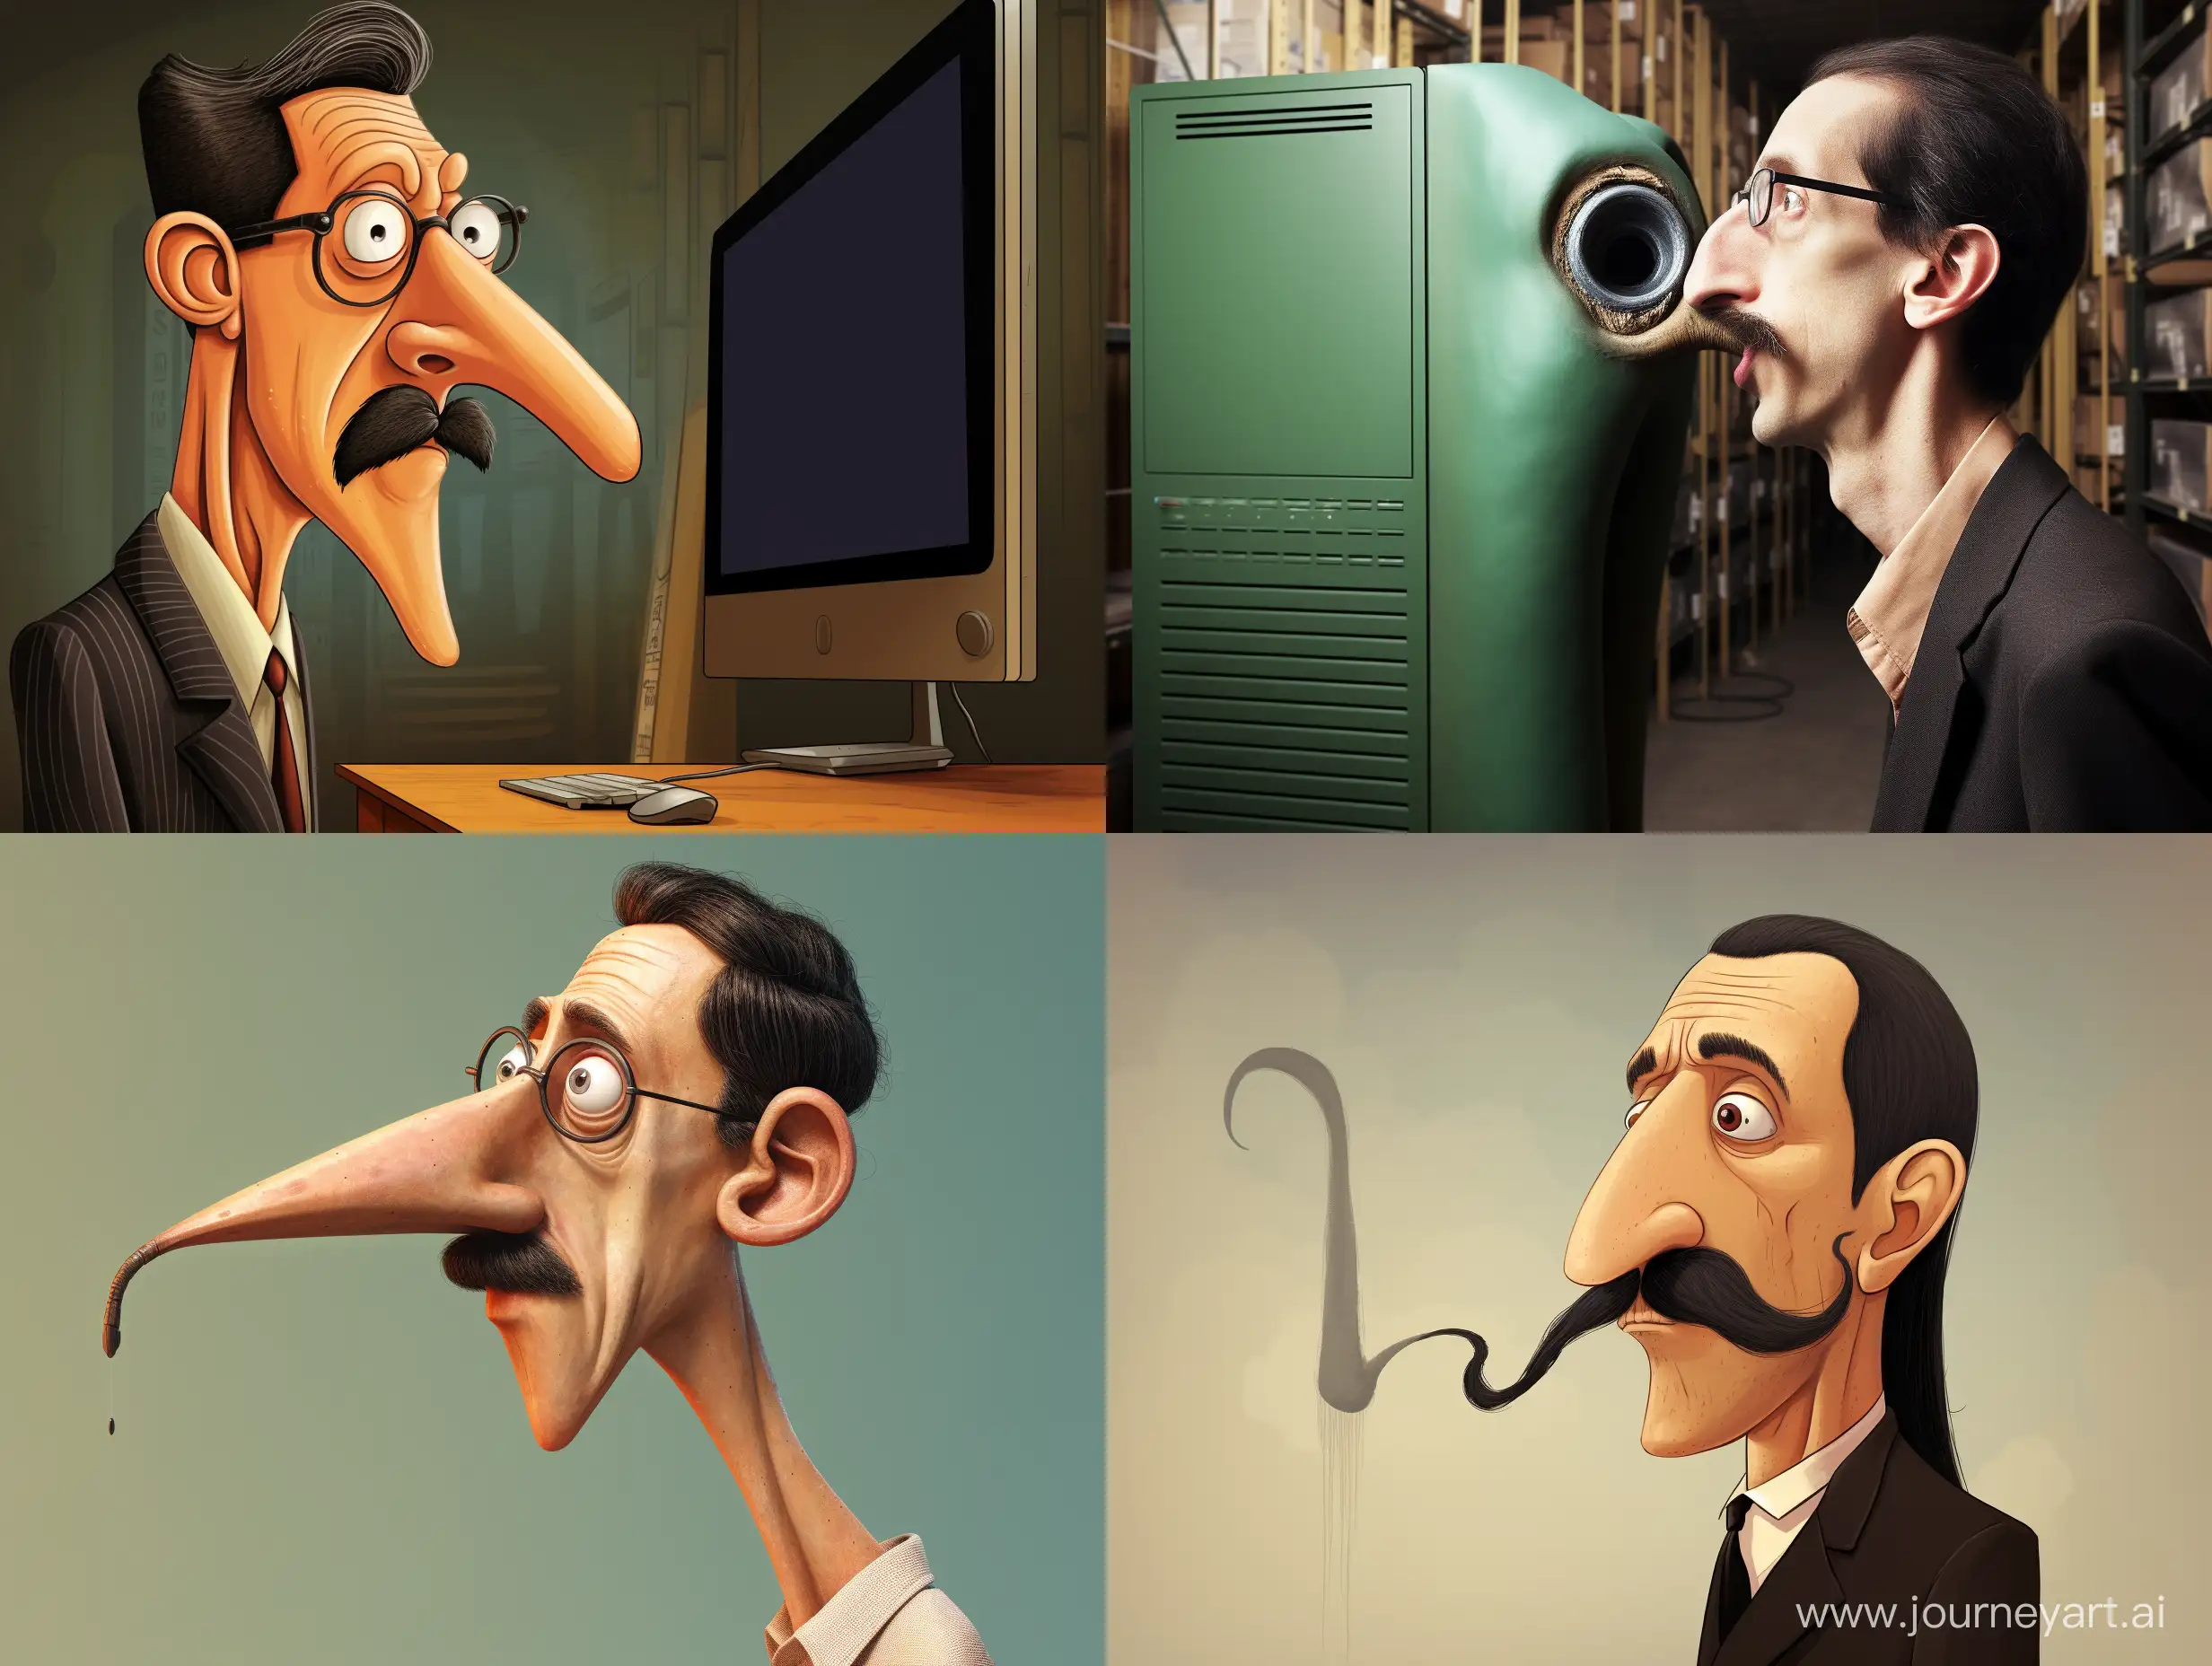 Eccentric-Computer-Scientist-with-an-Elongated-Nose